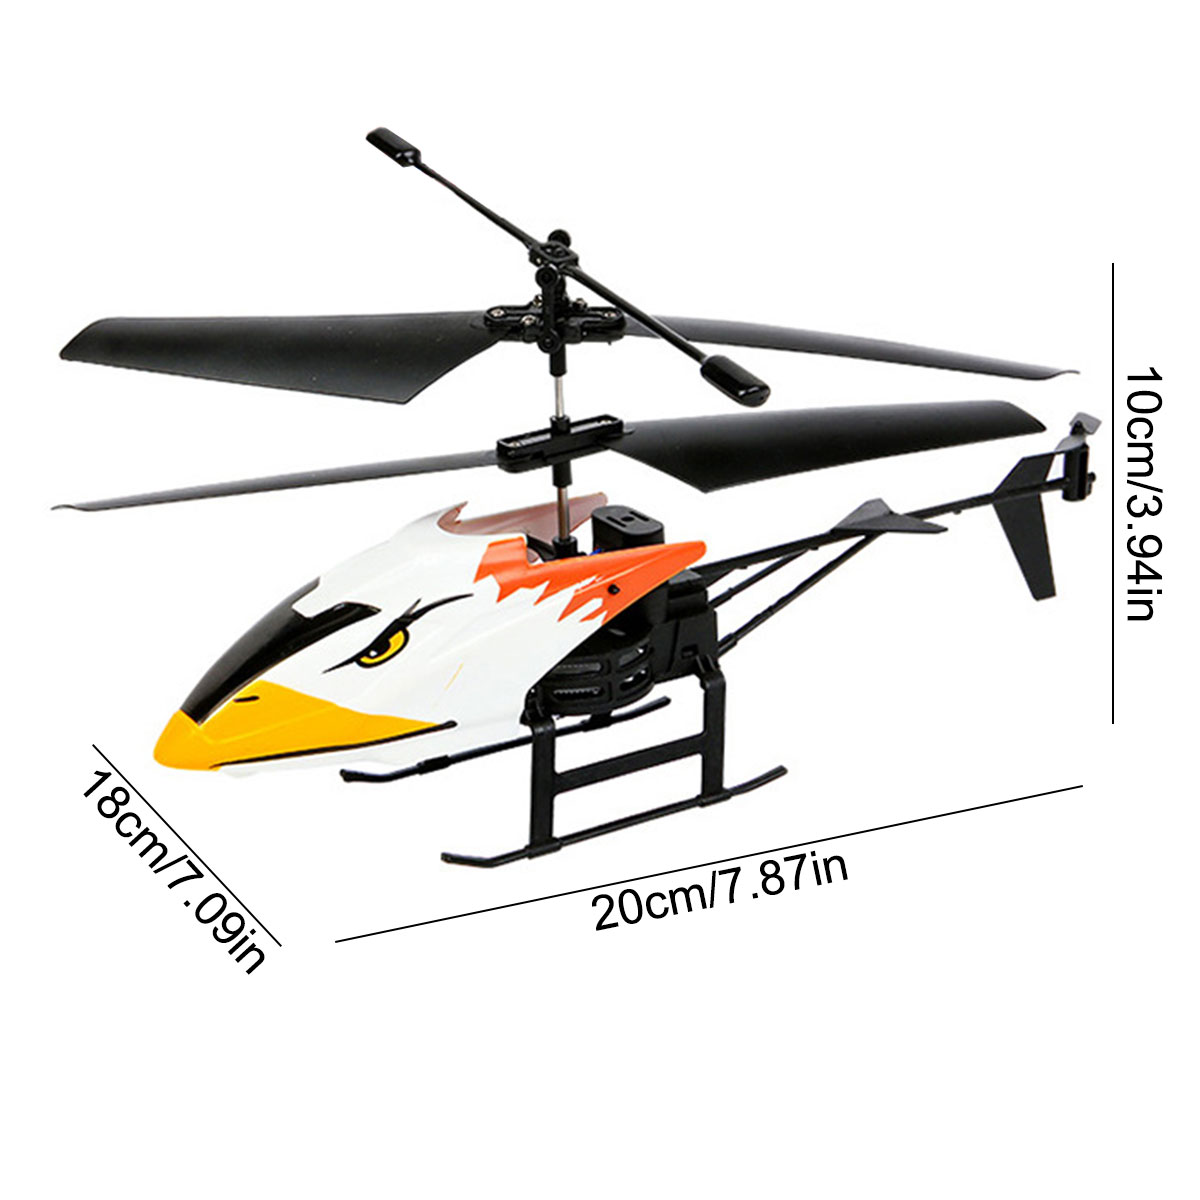 2CH 2.4G Wolf/Shark/Eagle Style USB Charging RC Helicopter RTF for Children Outdoor Toys